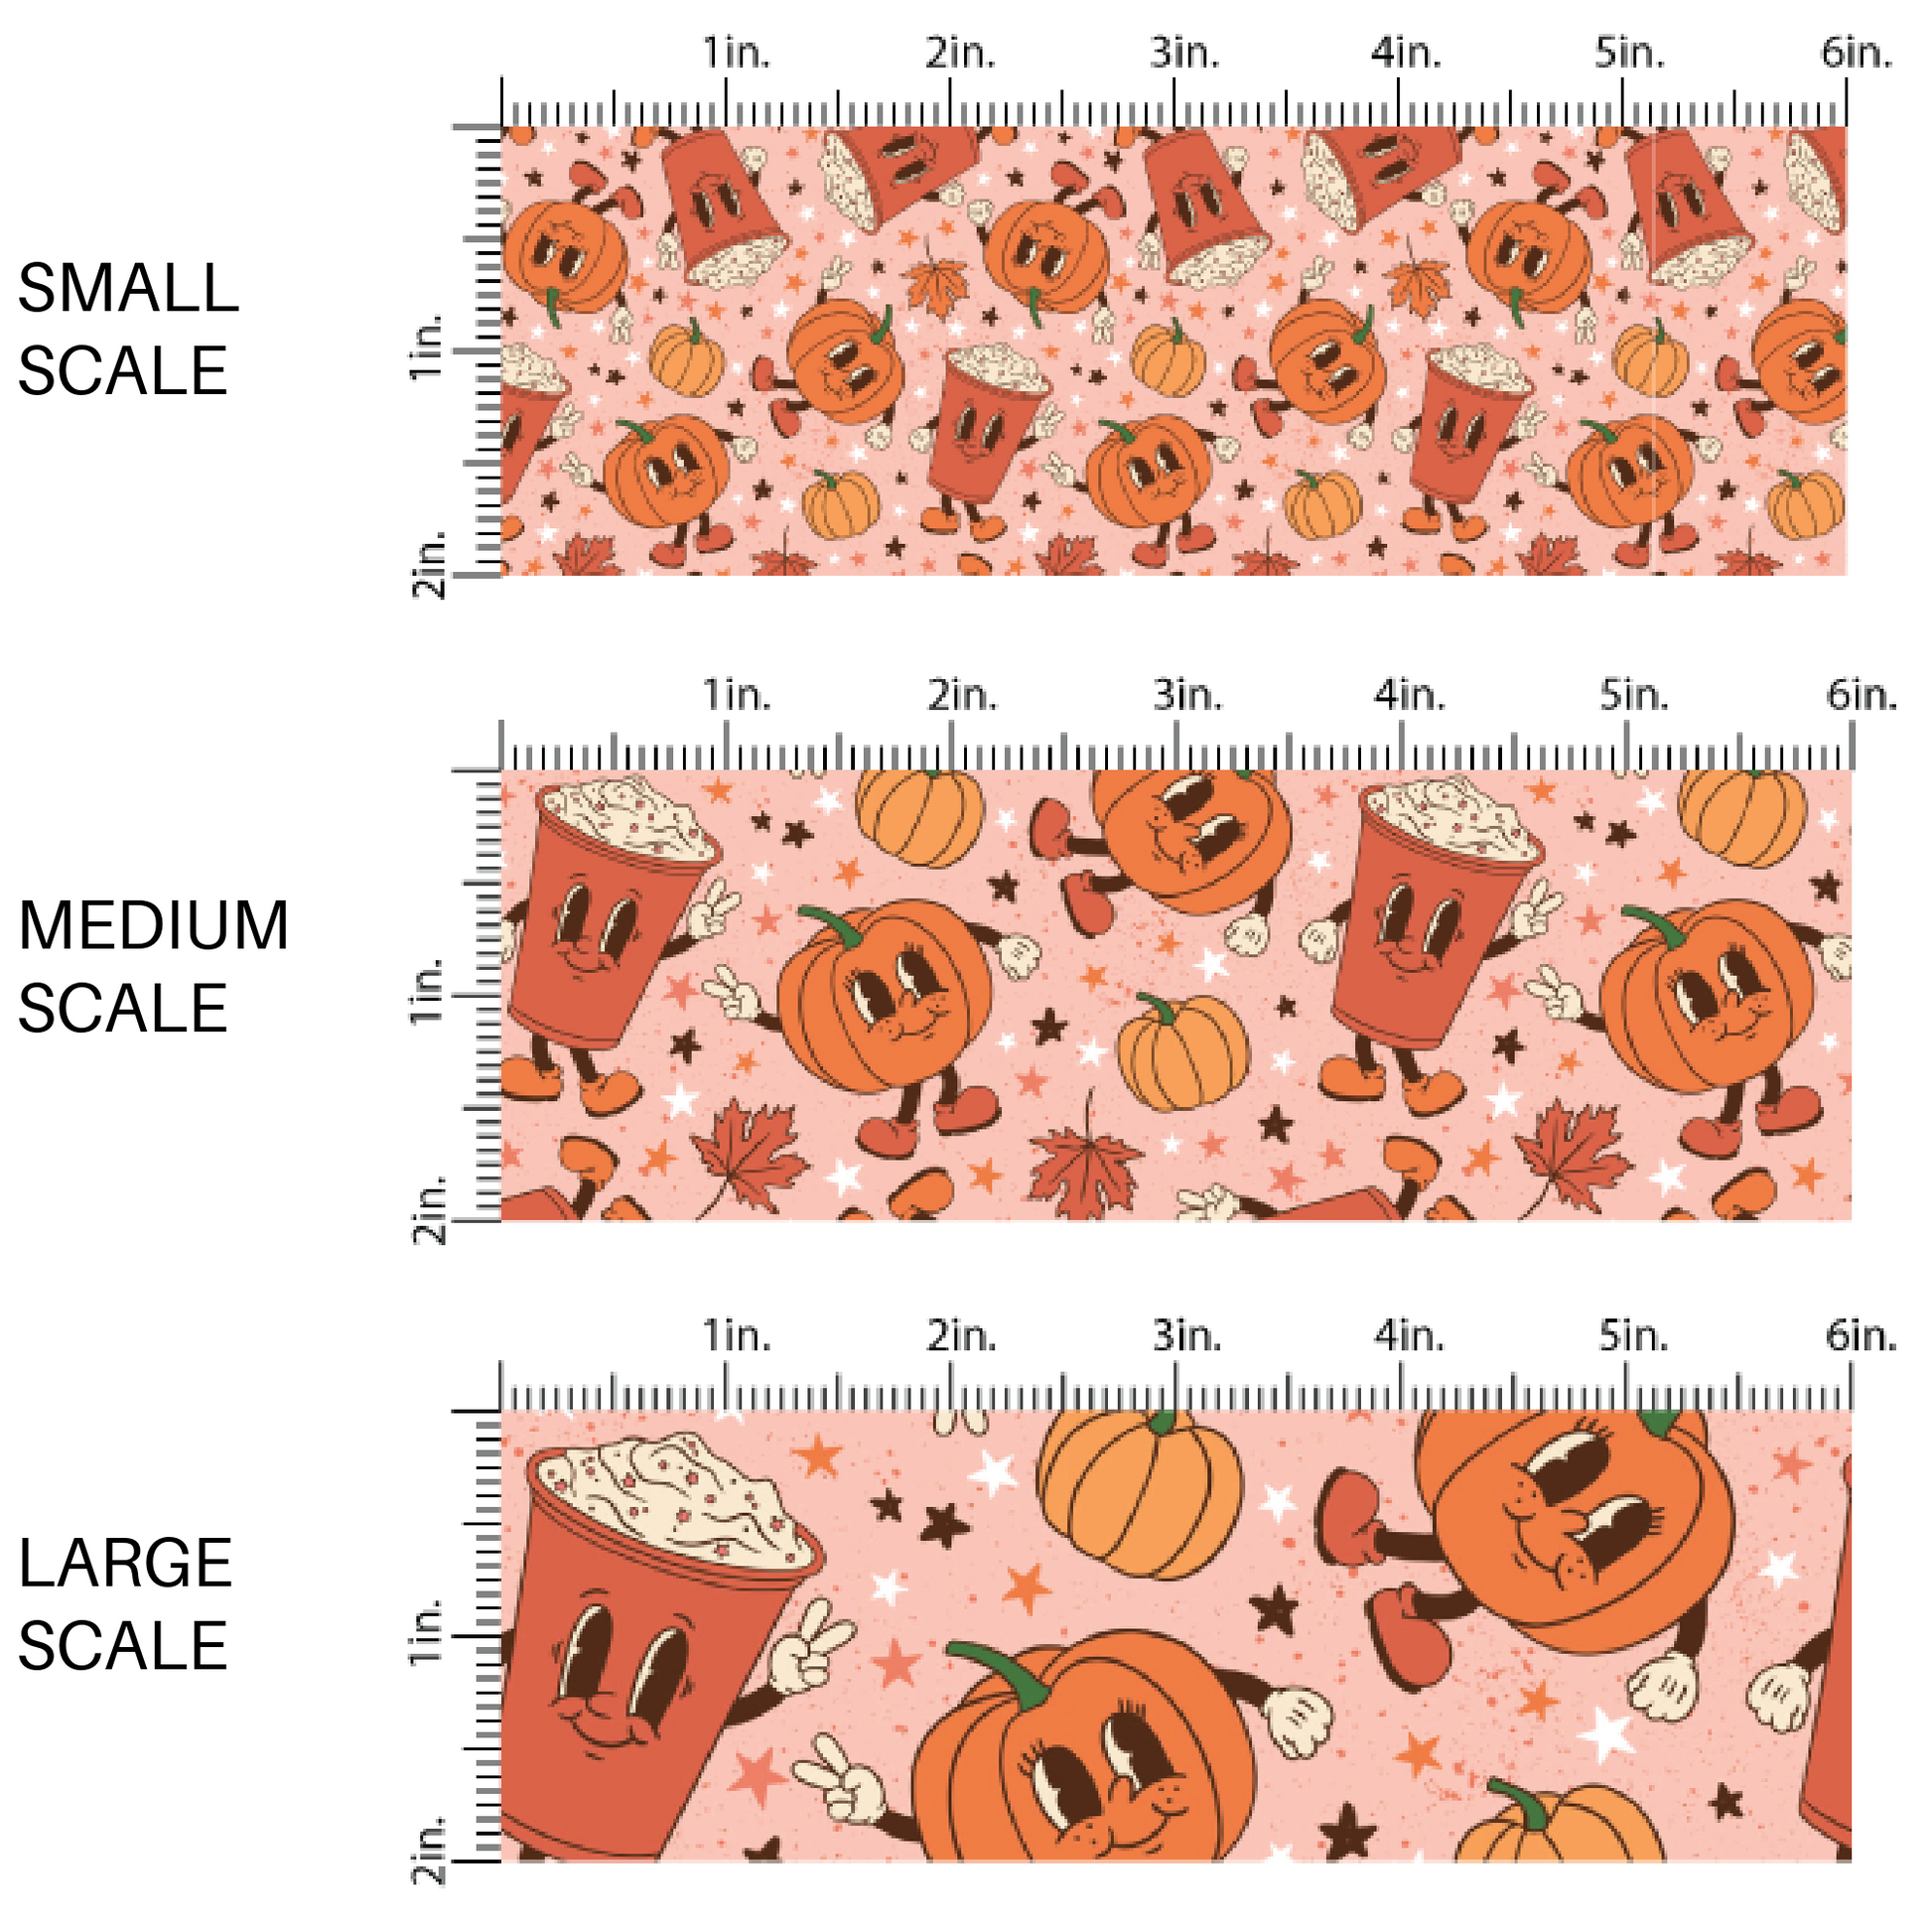 Fall themed high quality fabric adaptable for all your crafting needs. Make cute baby headwraps, fun girl hairbows, knotted headbands for adults or kids, clothing, and more!